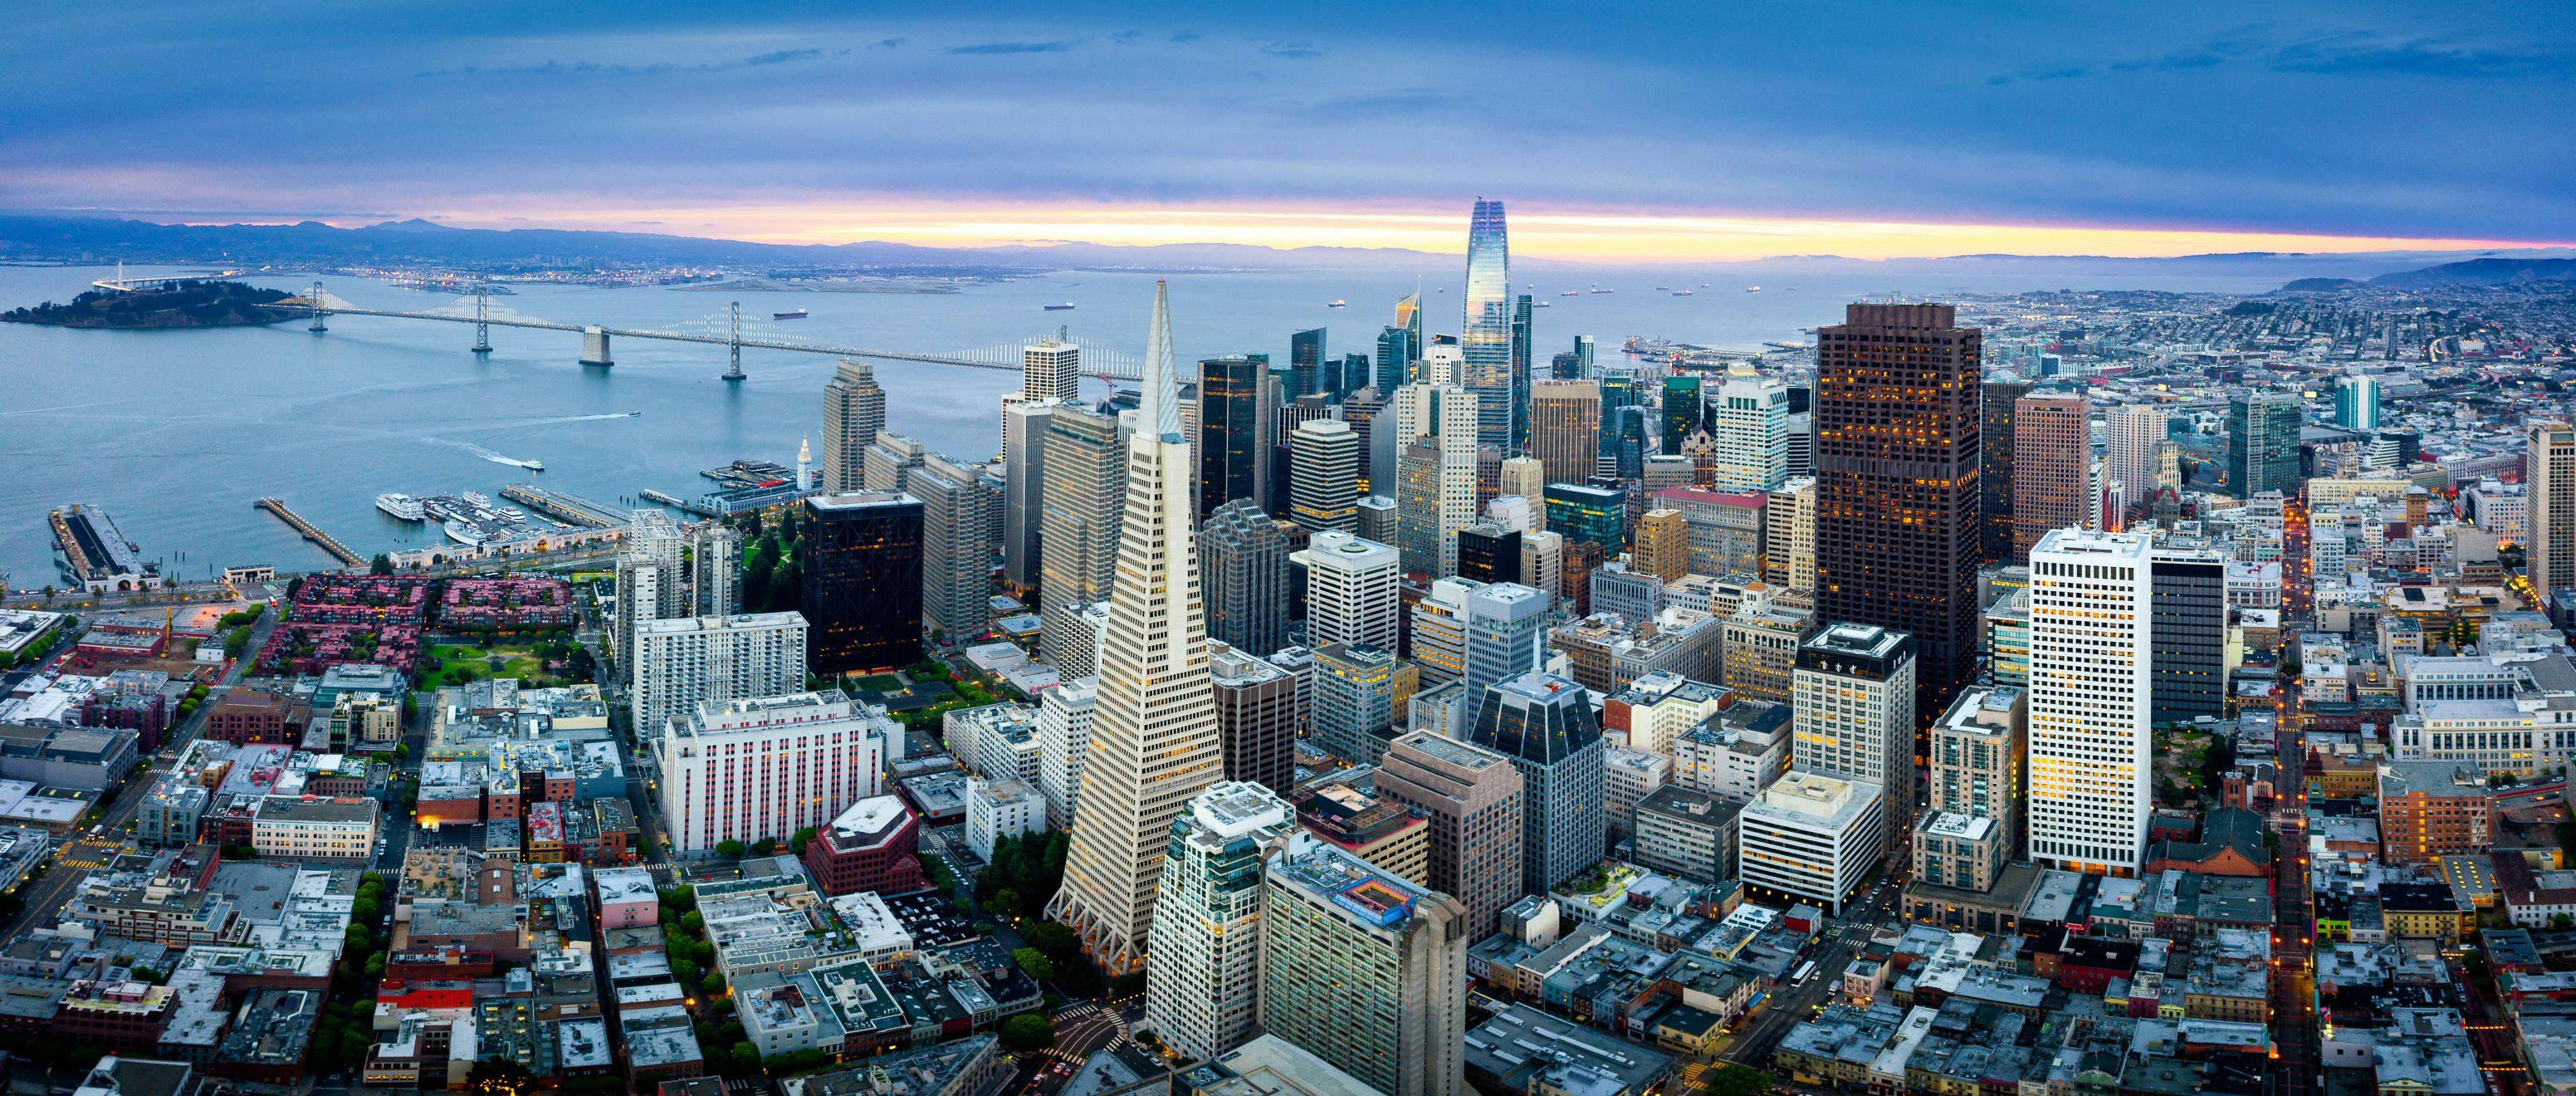 RXSight made several announcements at AAO 2023 in San Francisco. (Image courtesy of Adobe Stock)